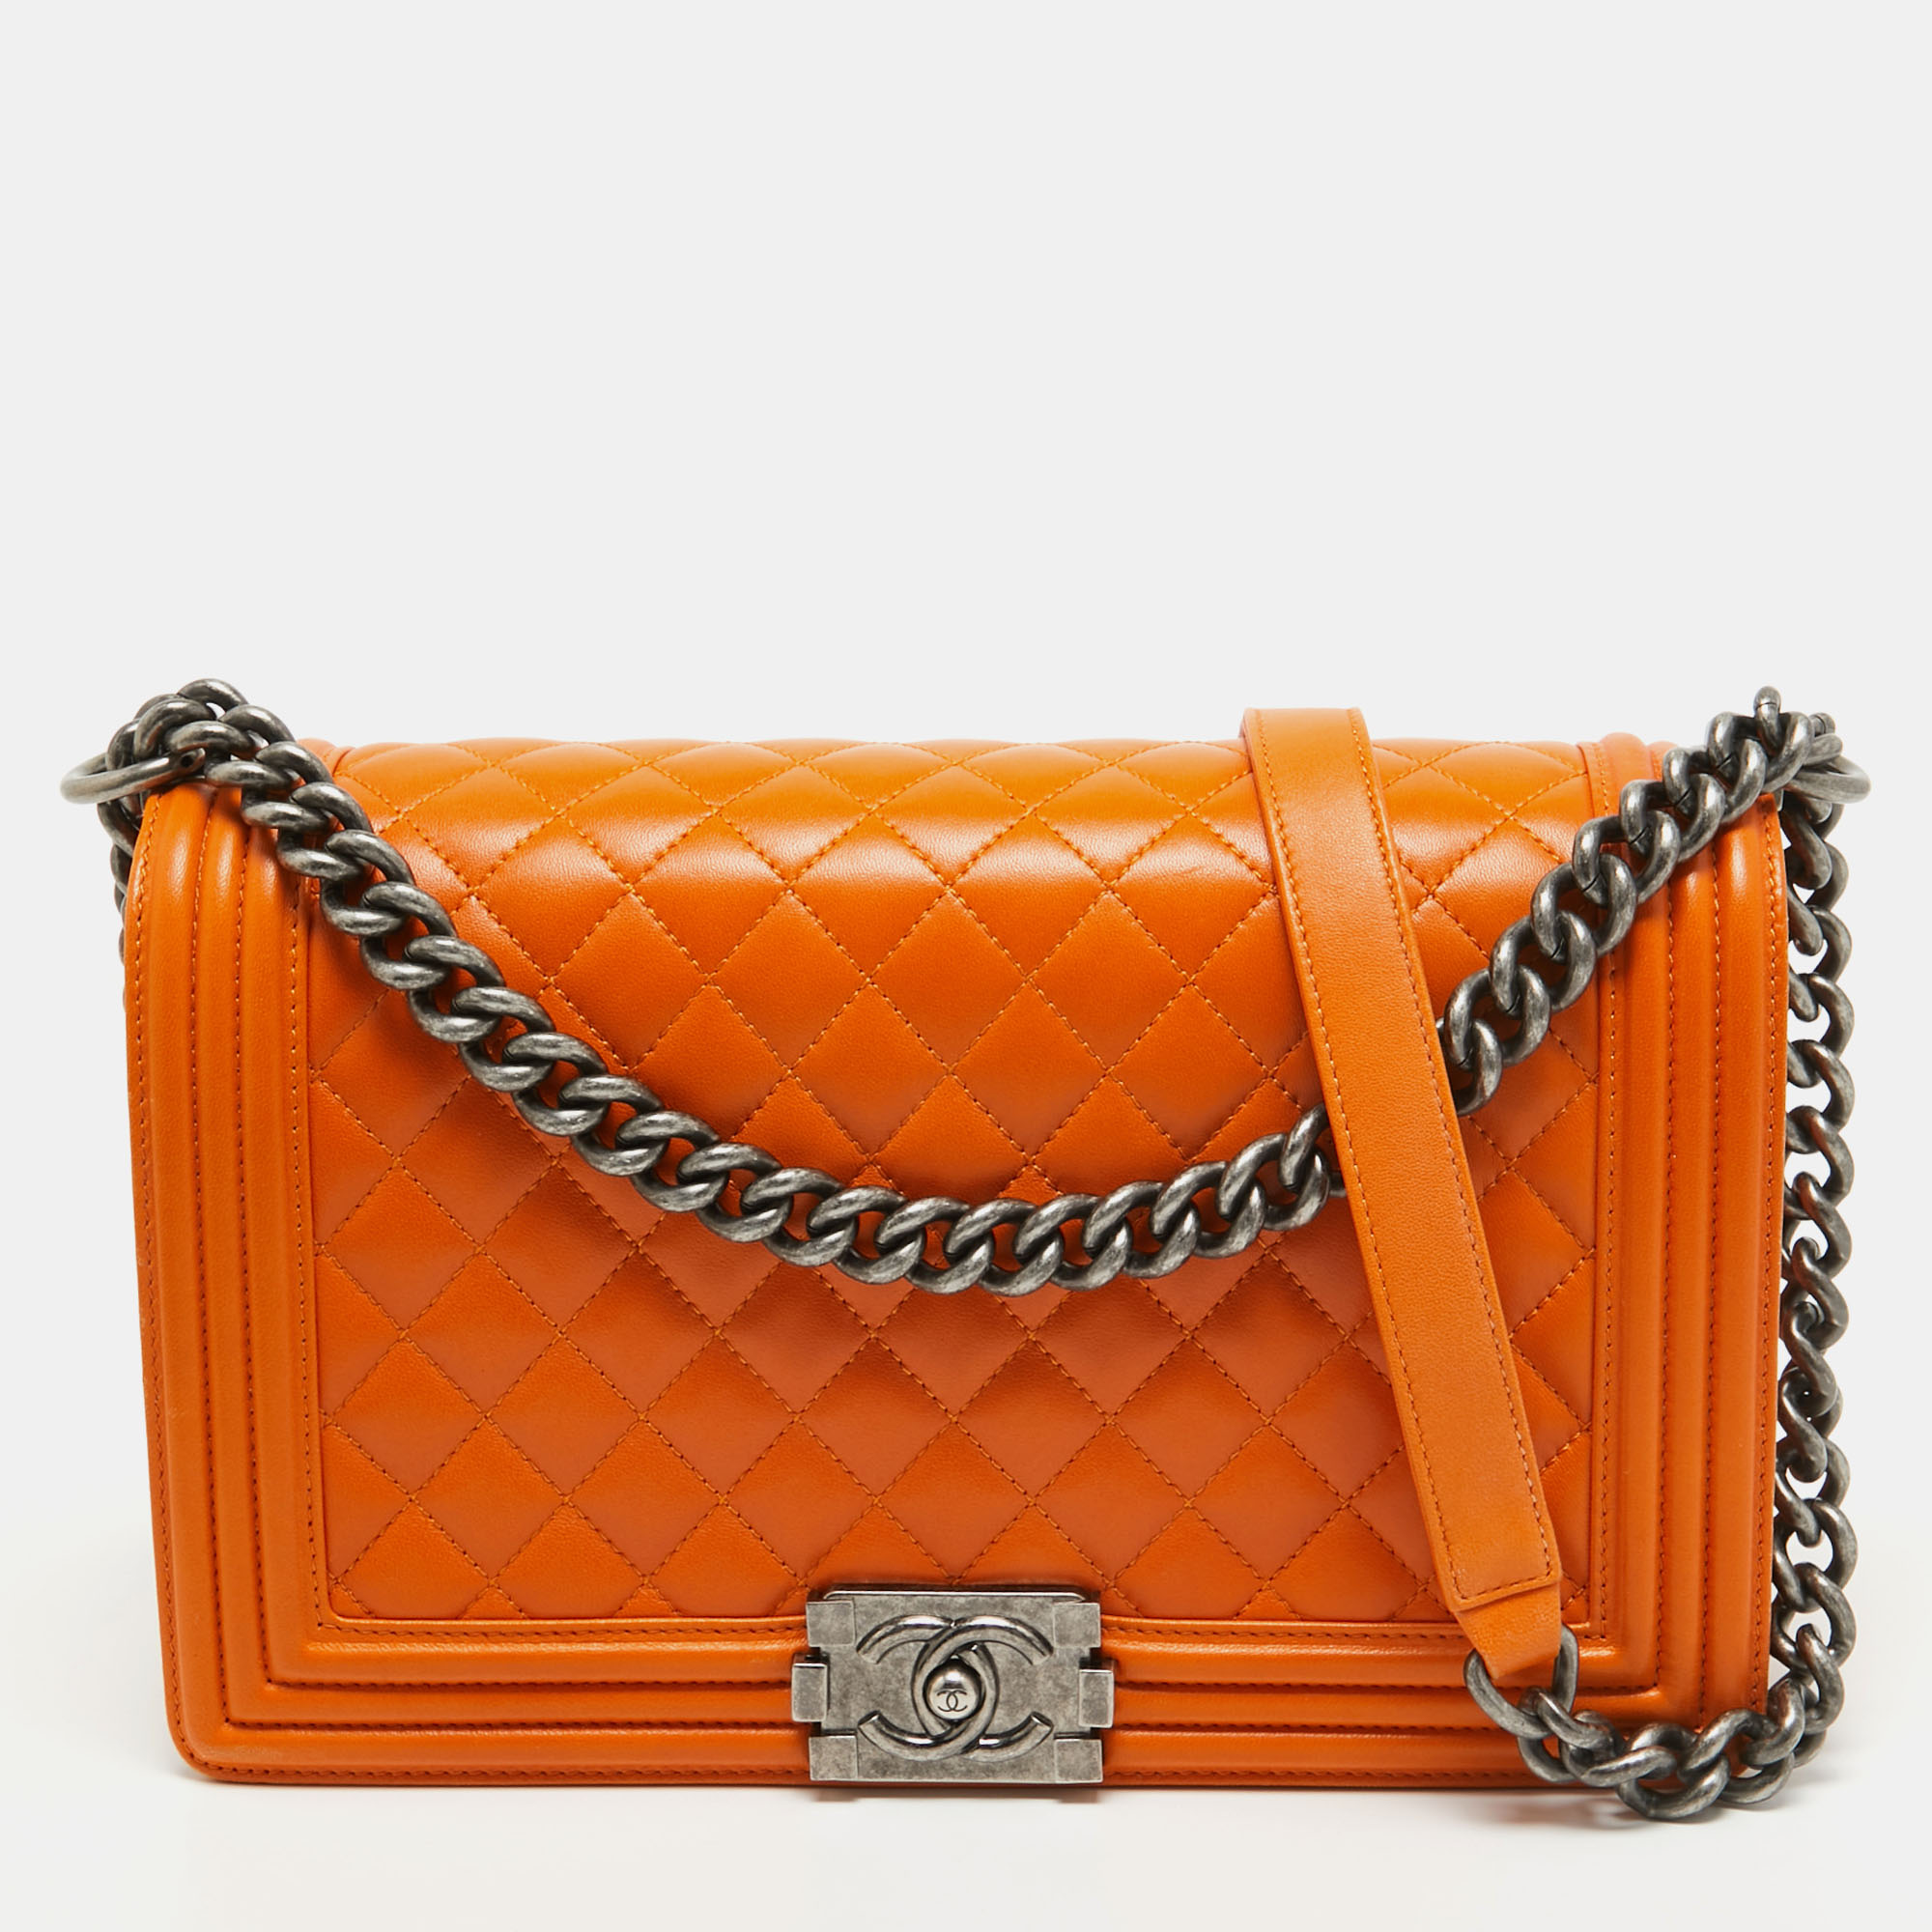 Pre-owned Chanel Orange Quilted Leather New Medium Boy Bag